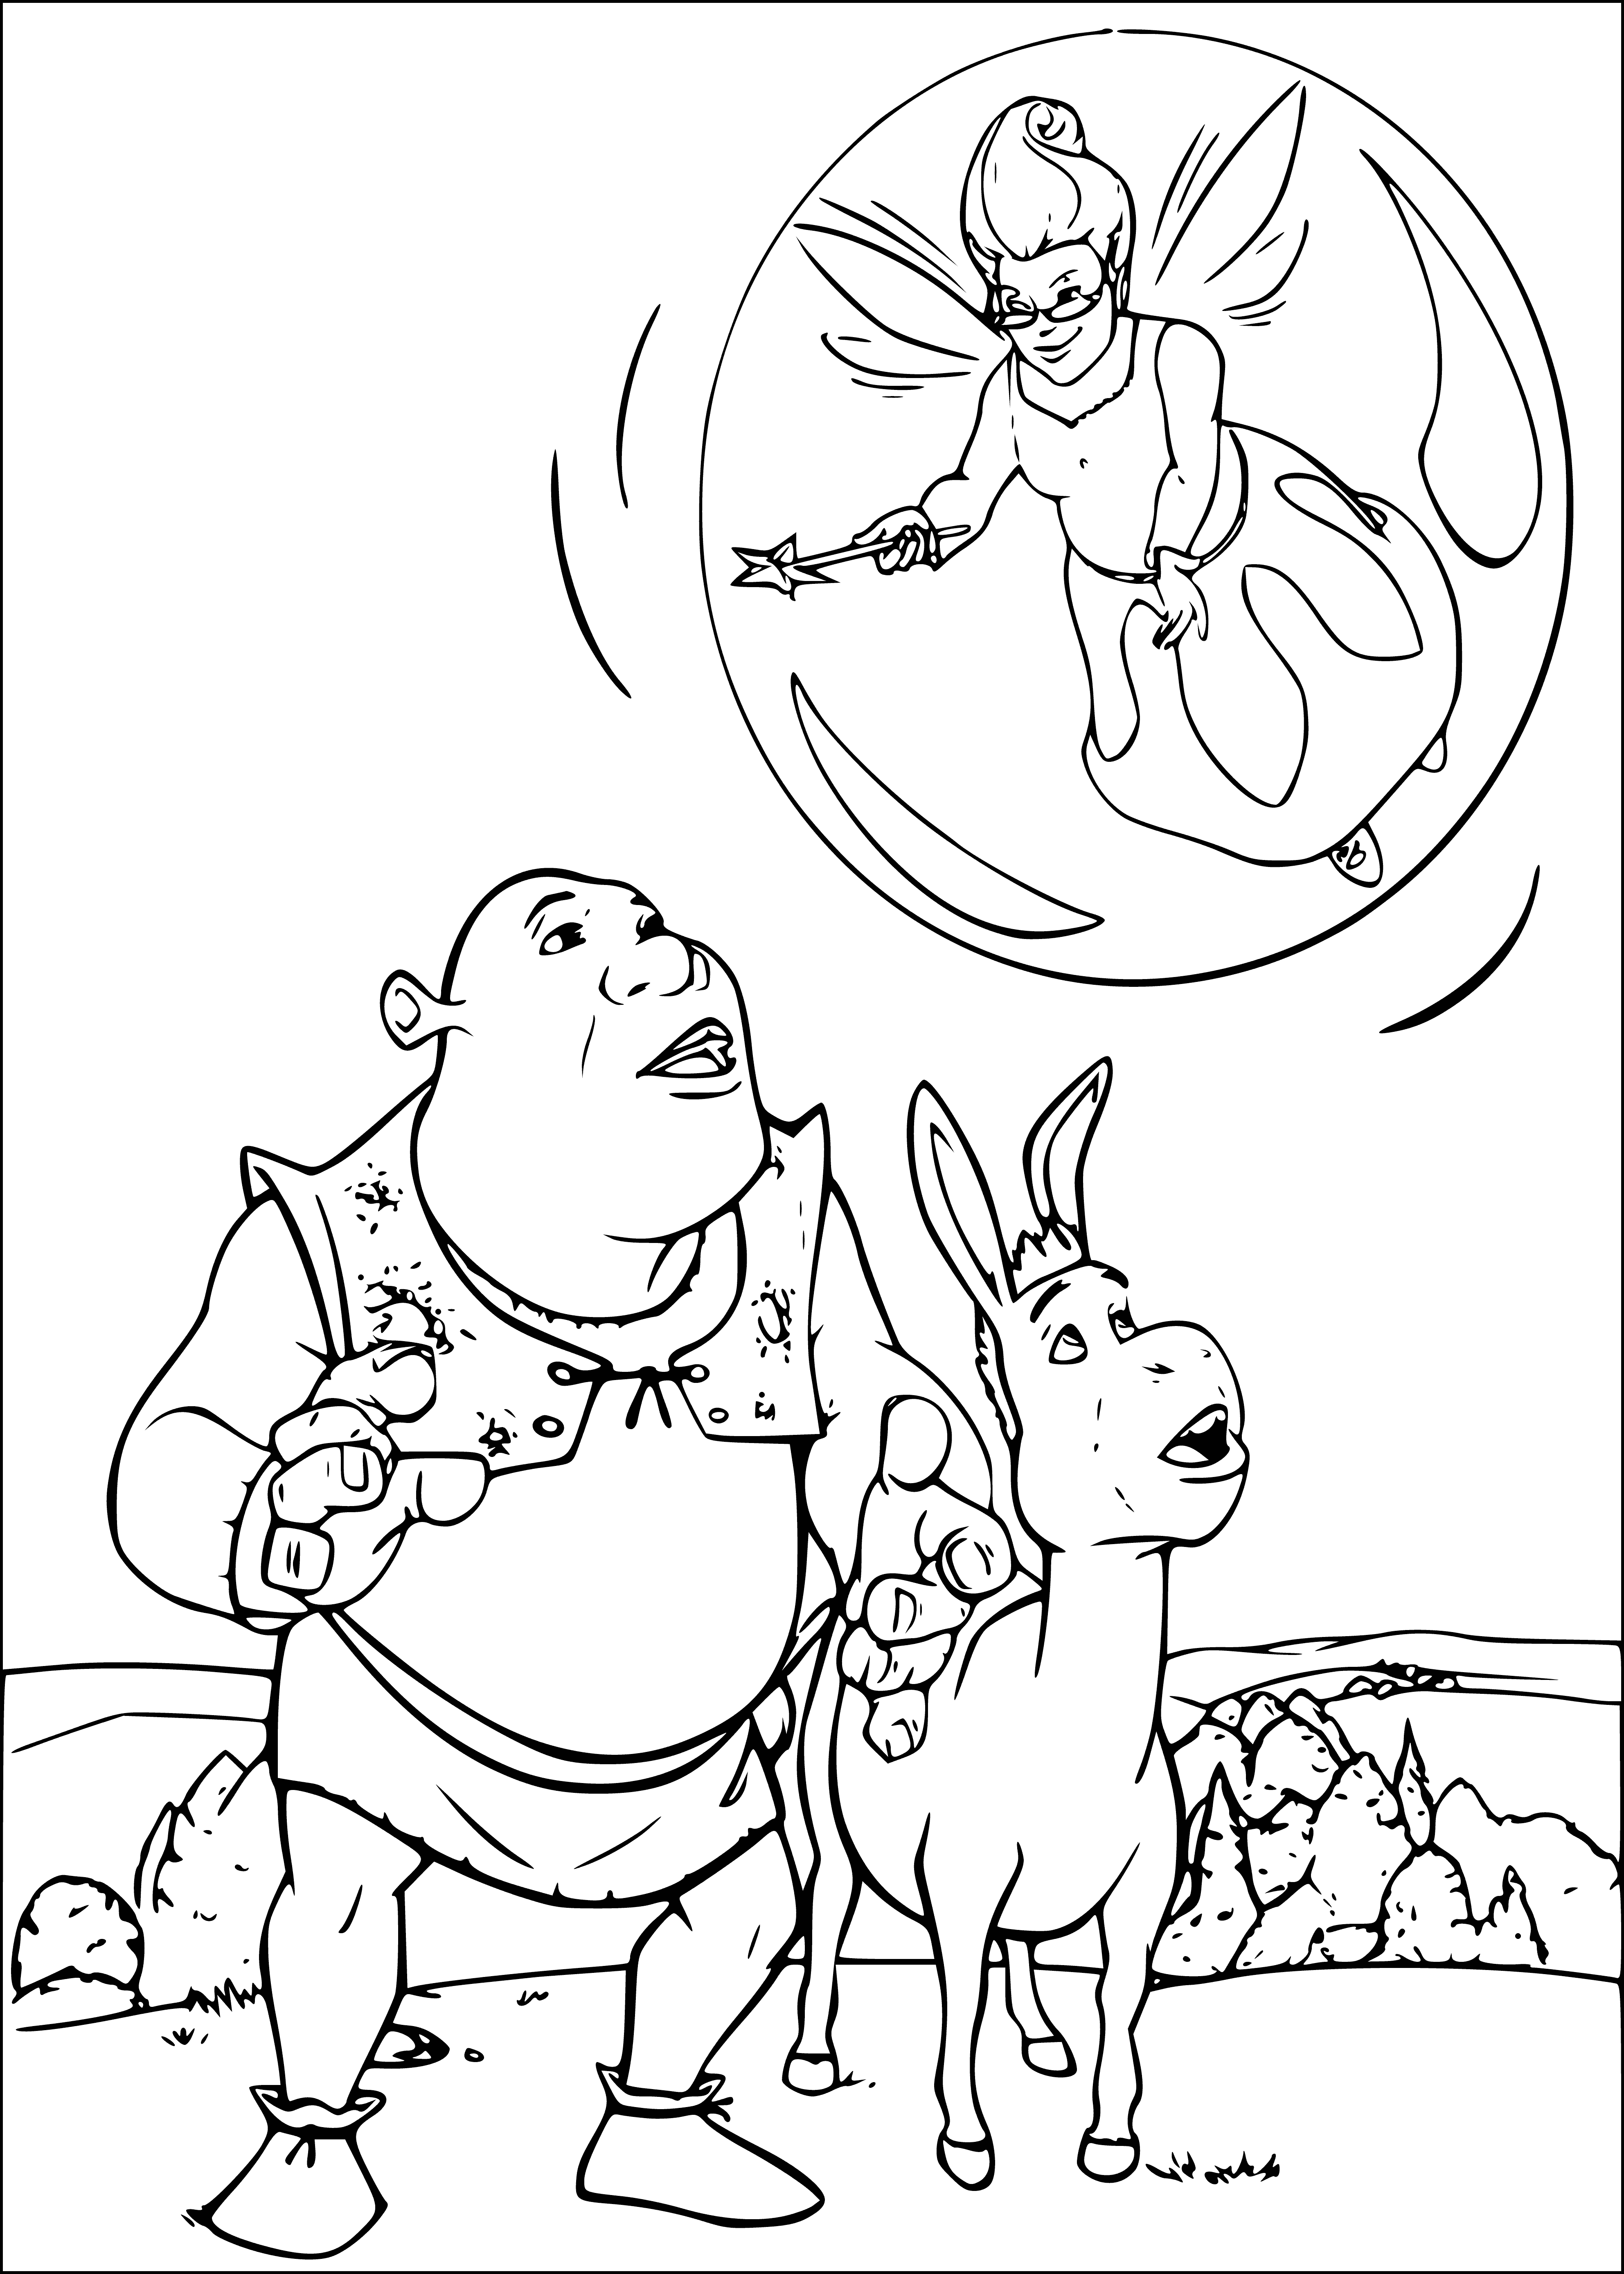 Shrek, Donkey and Fairy coloring page